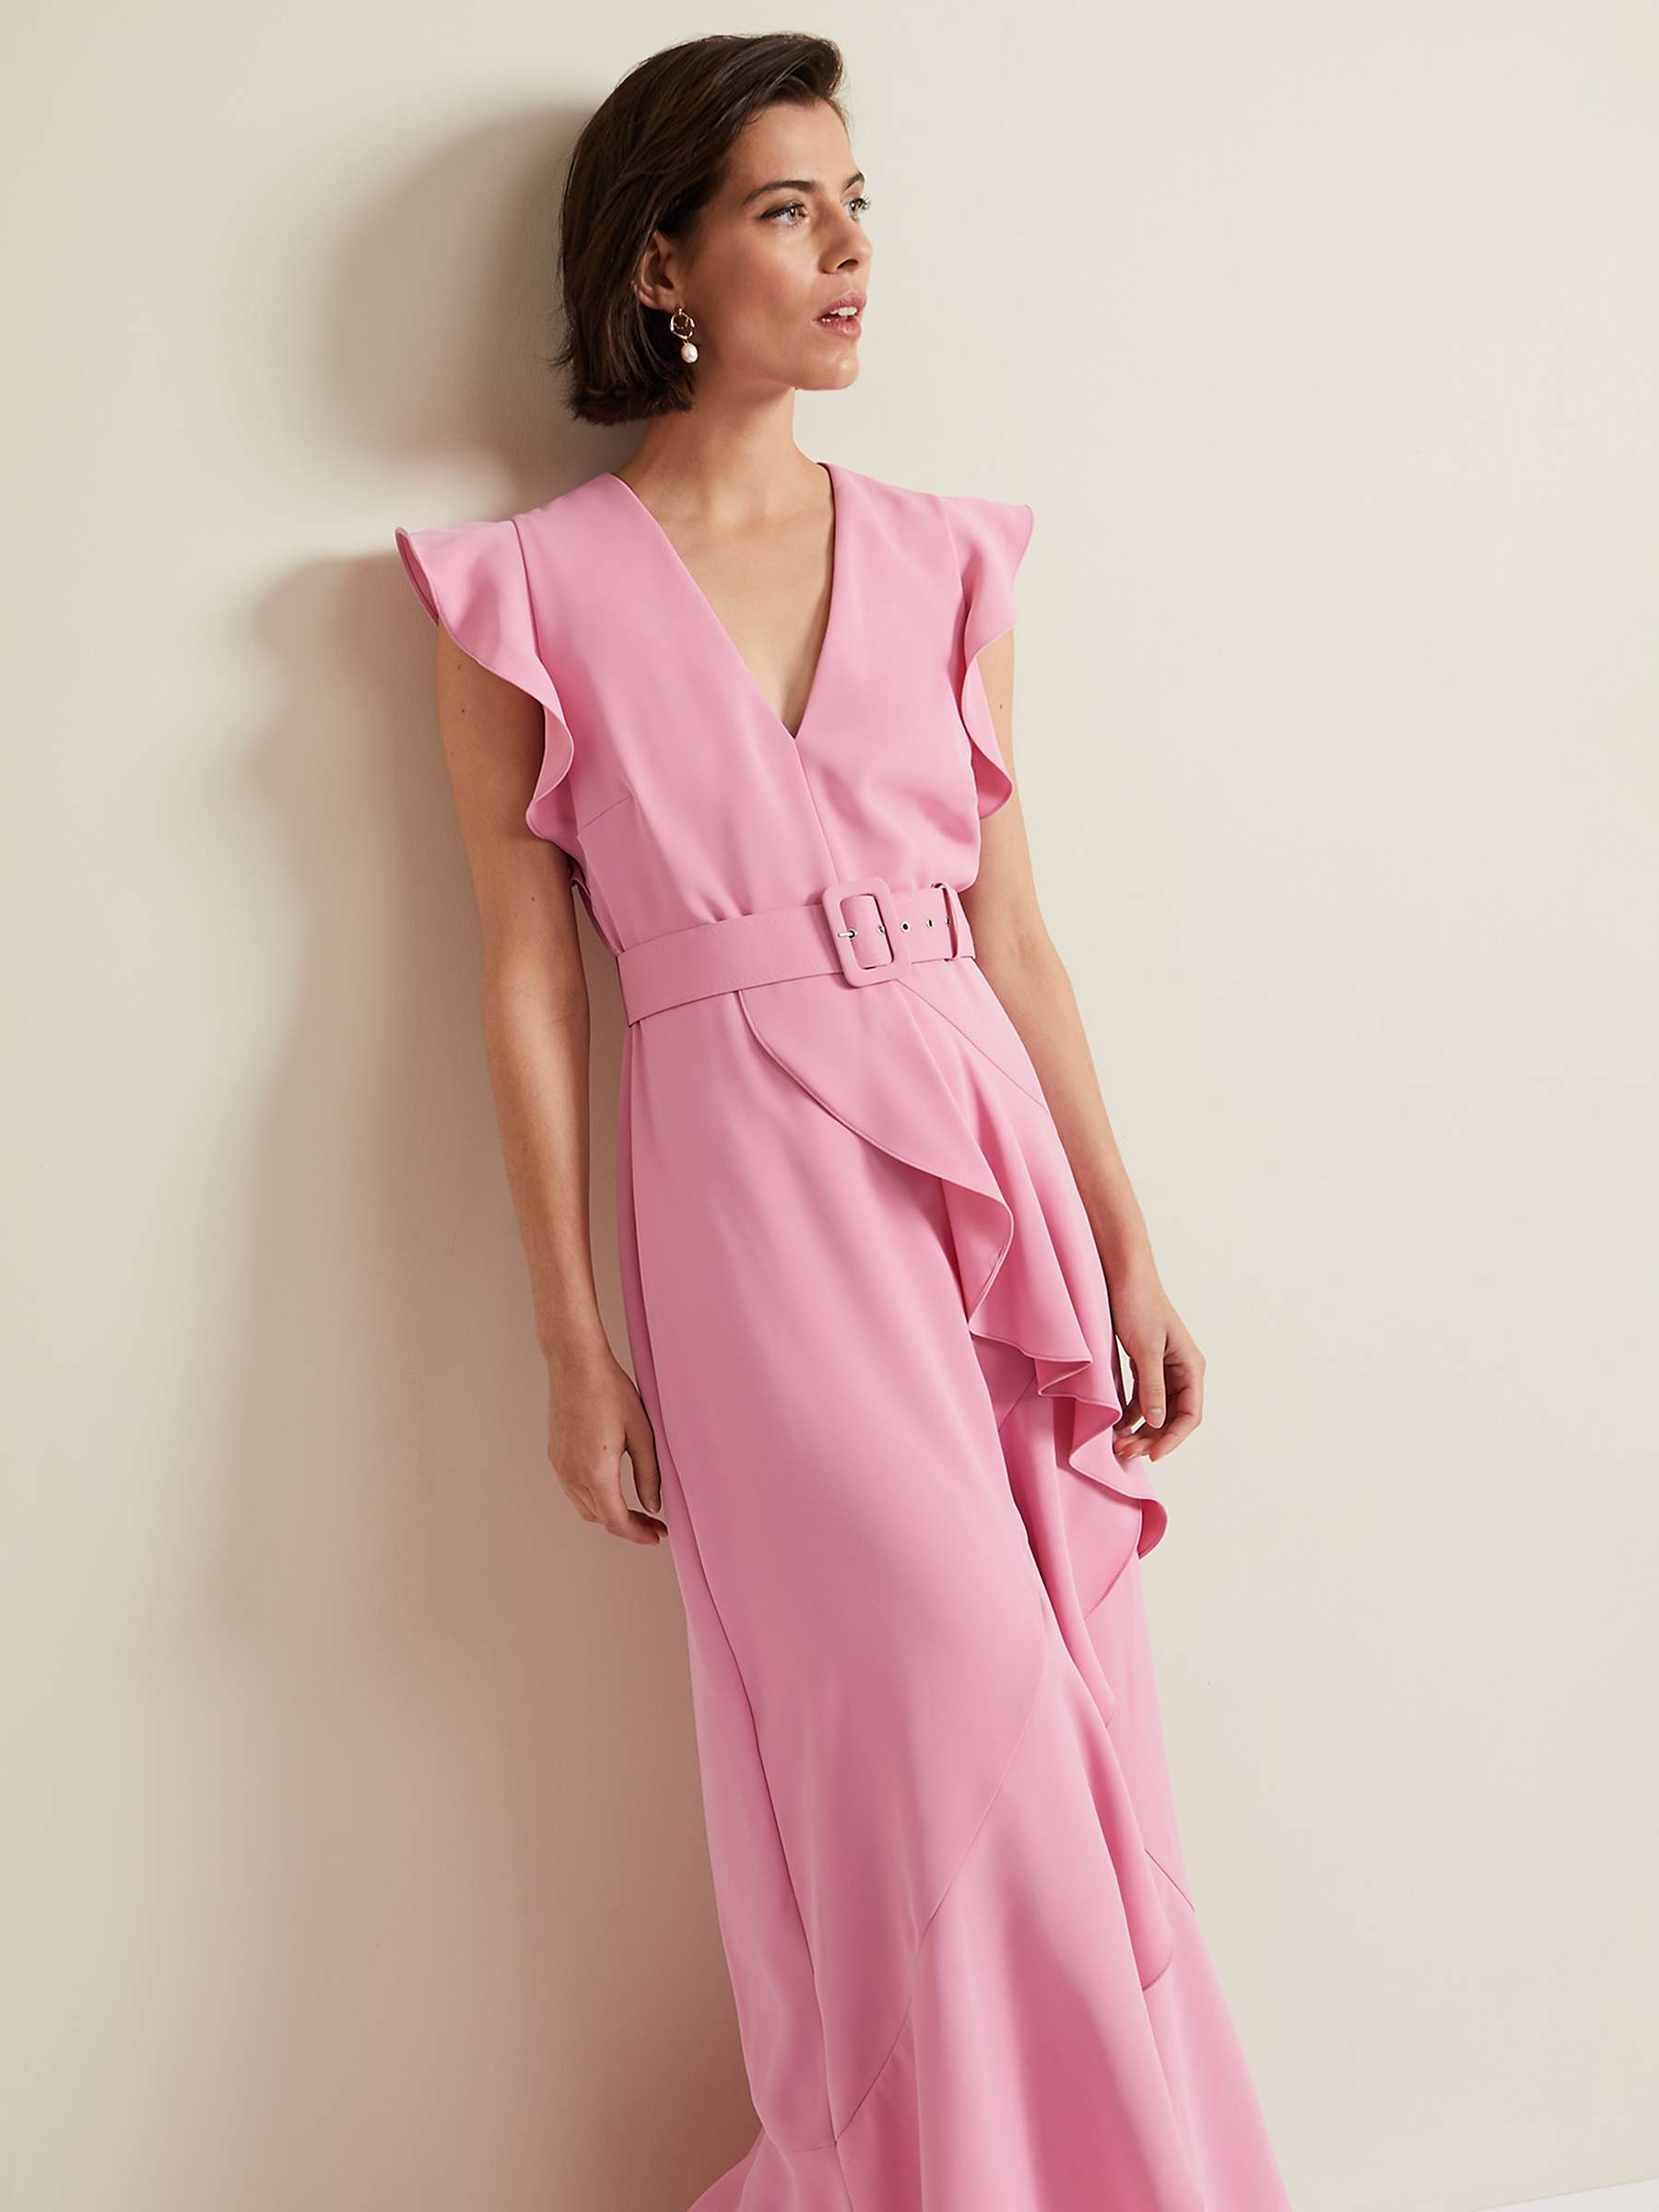 Buy Phase Eight Phoebe Frill Maxi Dress, Pink Online at johnlewis.com